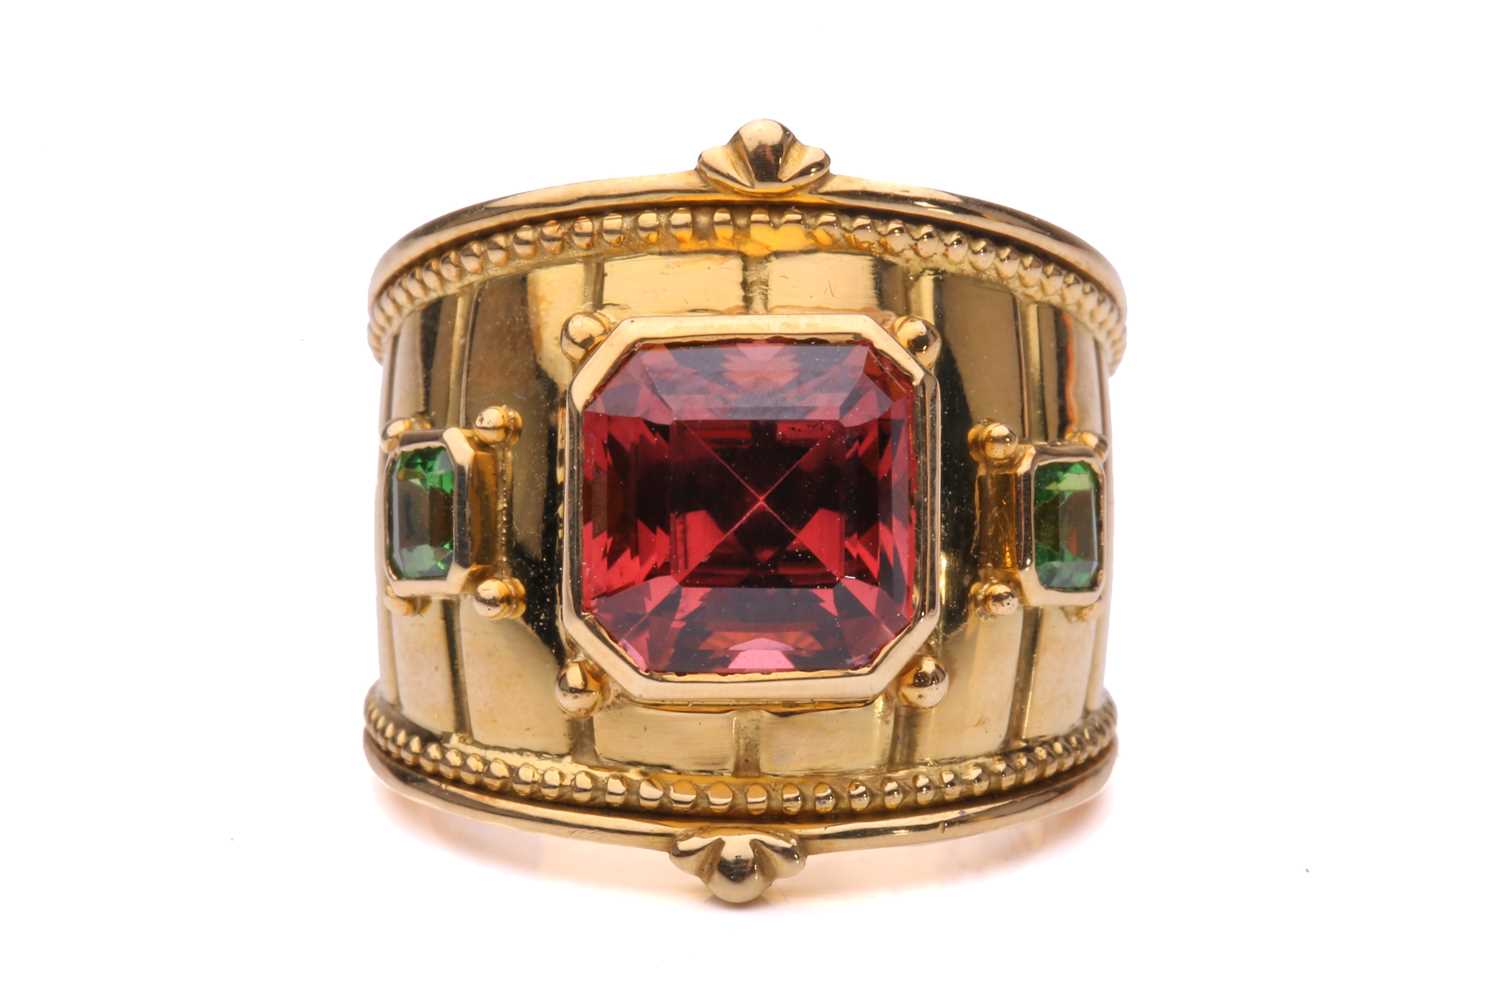 Theo Fennell - a gem-set 'Bombé' tapered templar ring in 18ct yellow gold, featuring an octagonal